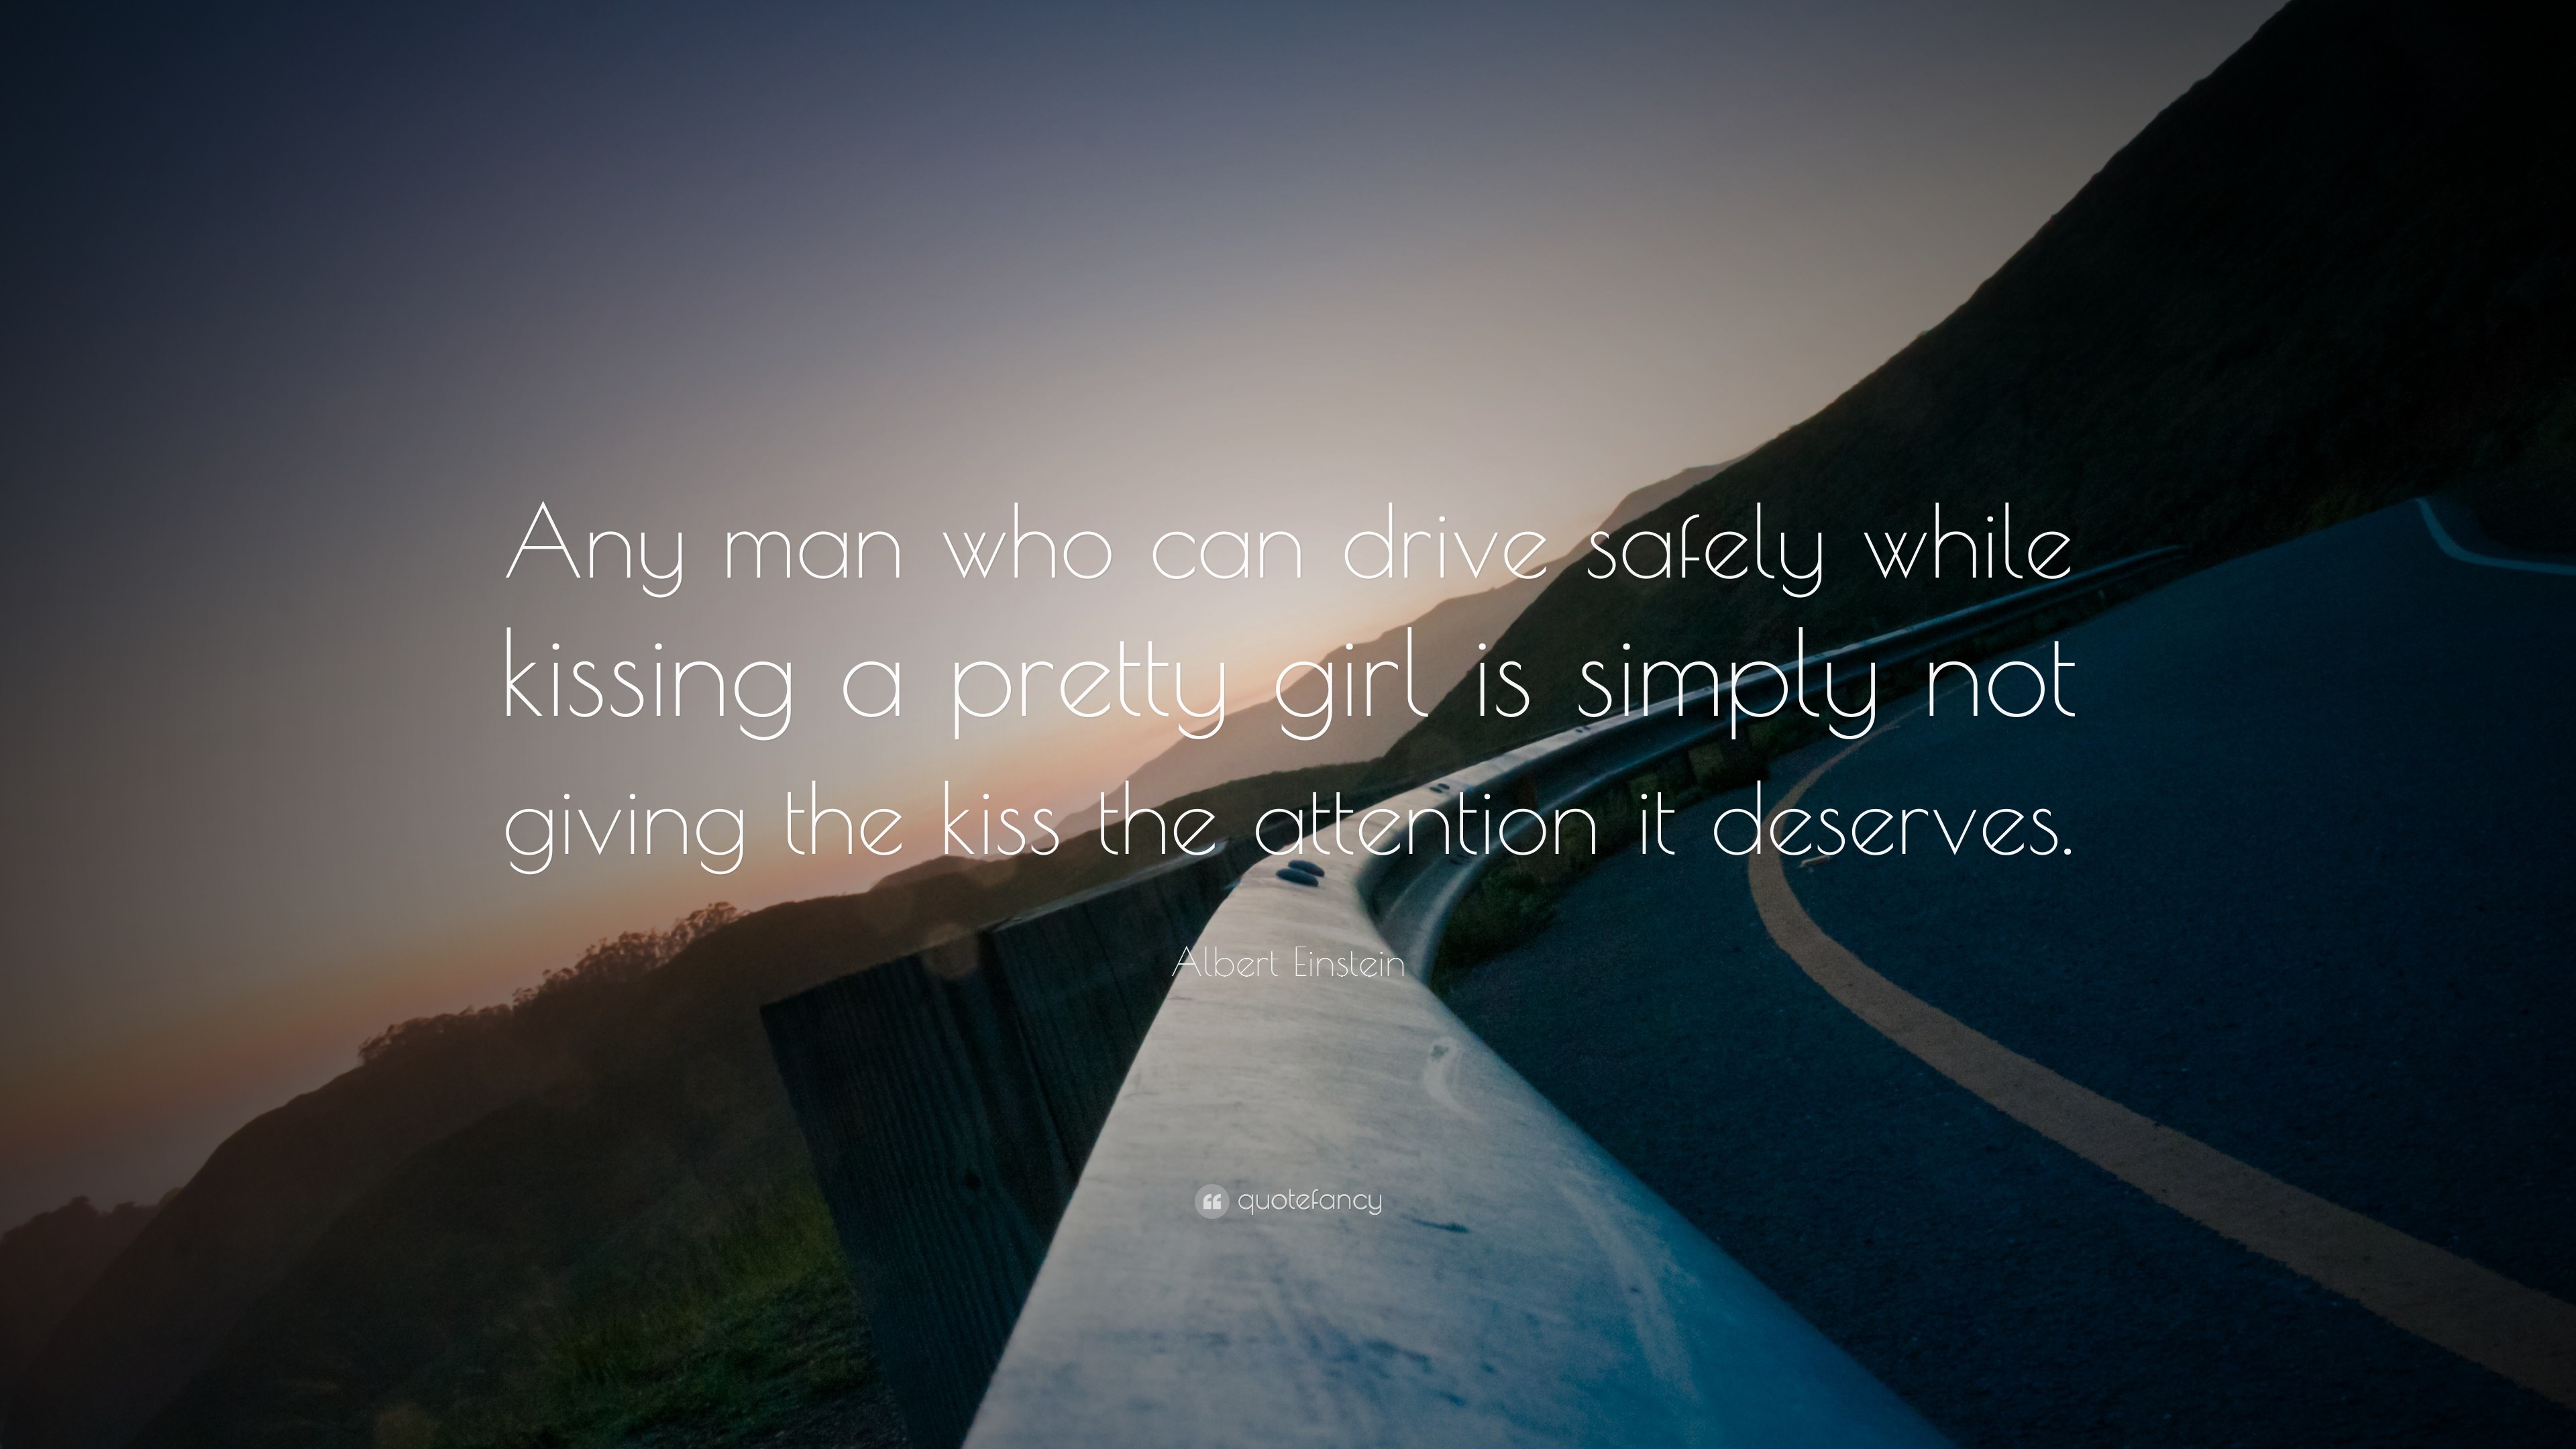 Albert Einstein Quote Any man who can drive safely while kissing a pretty girl